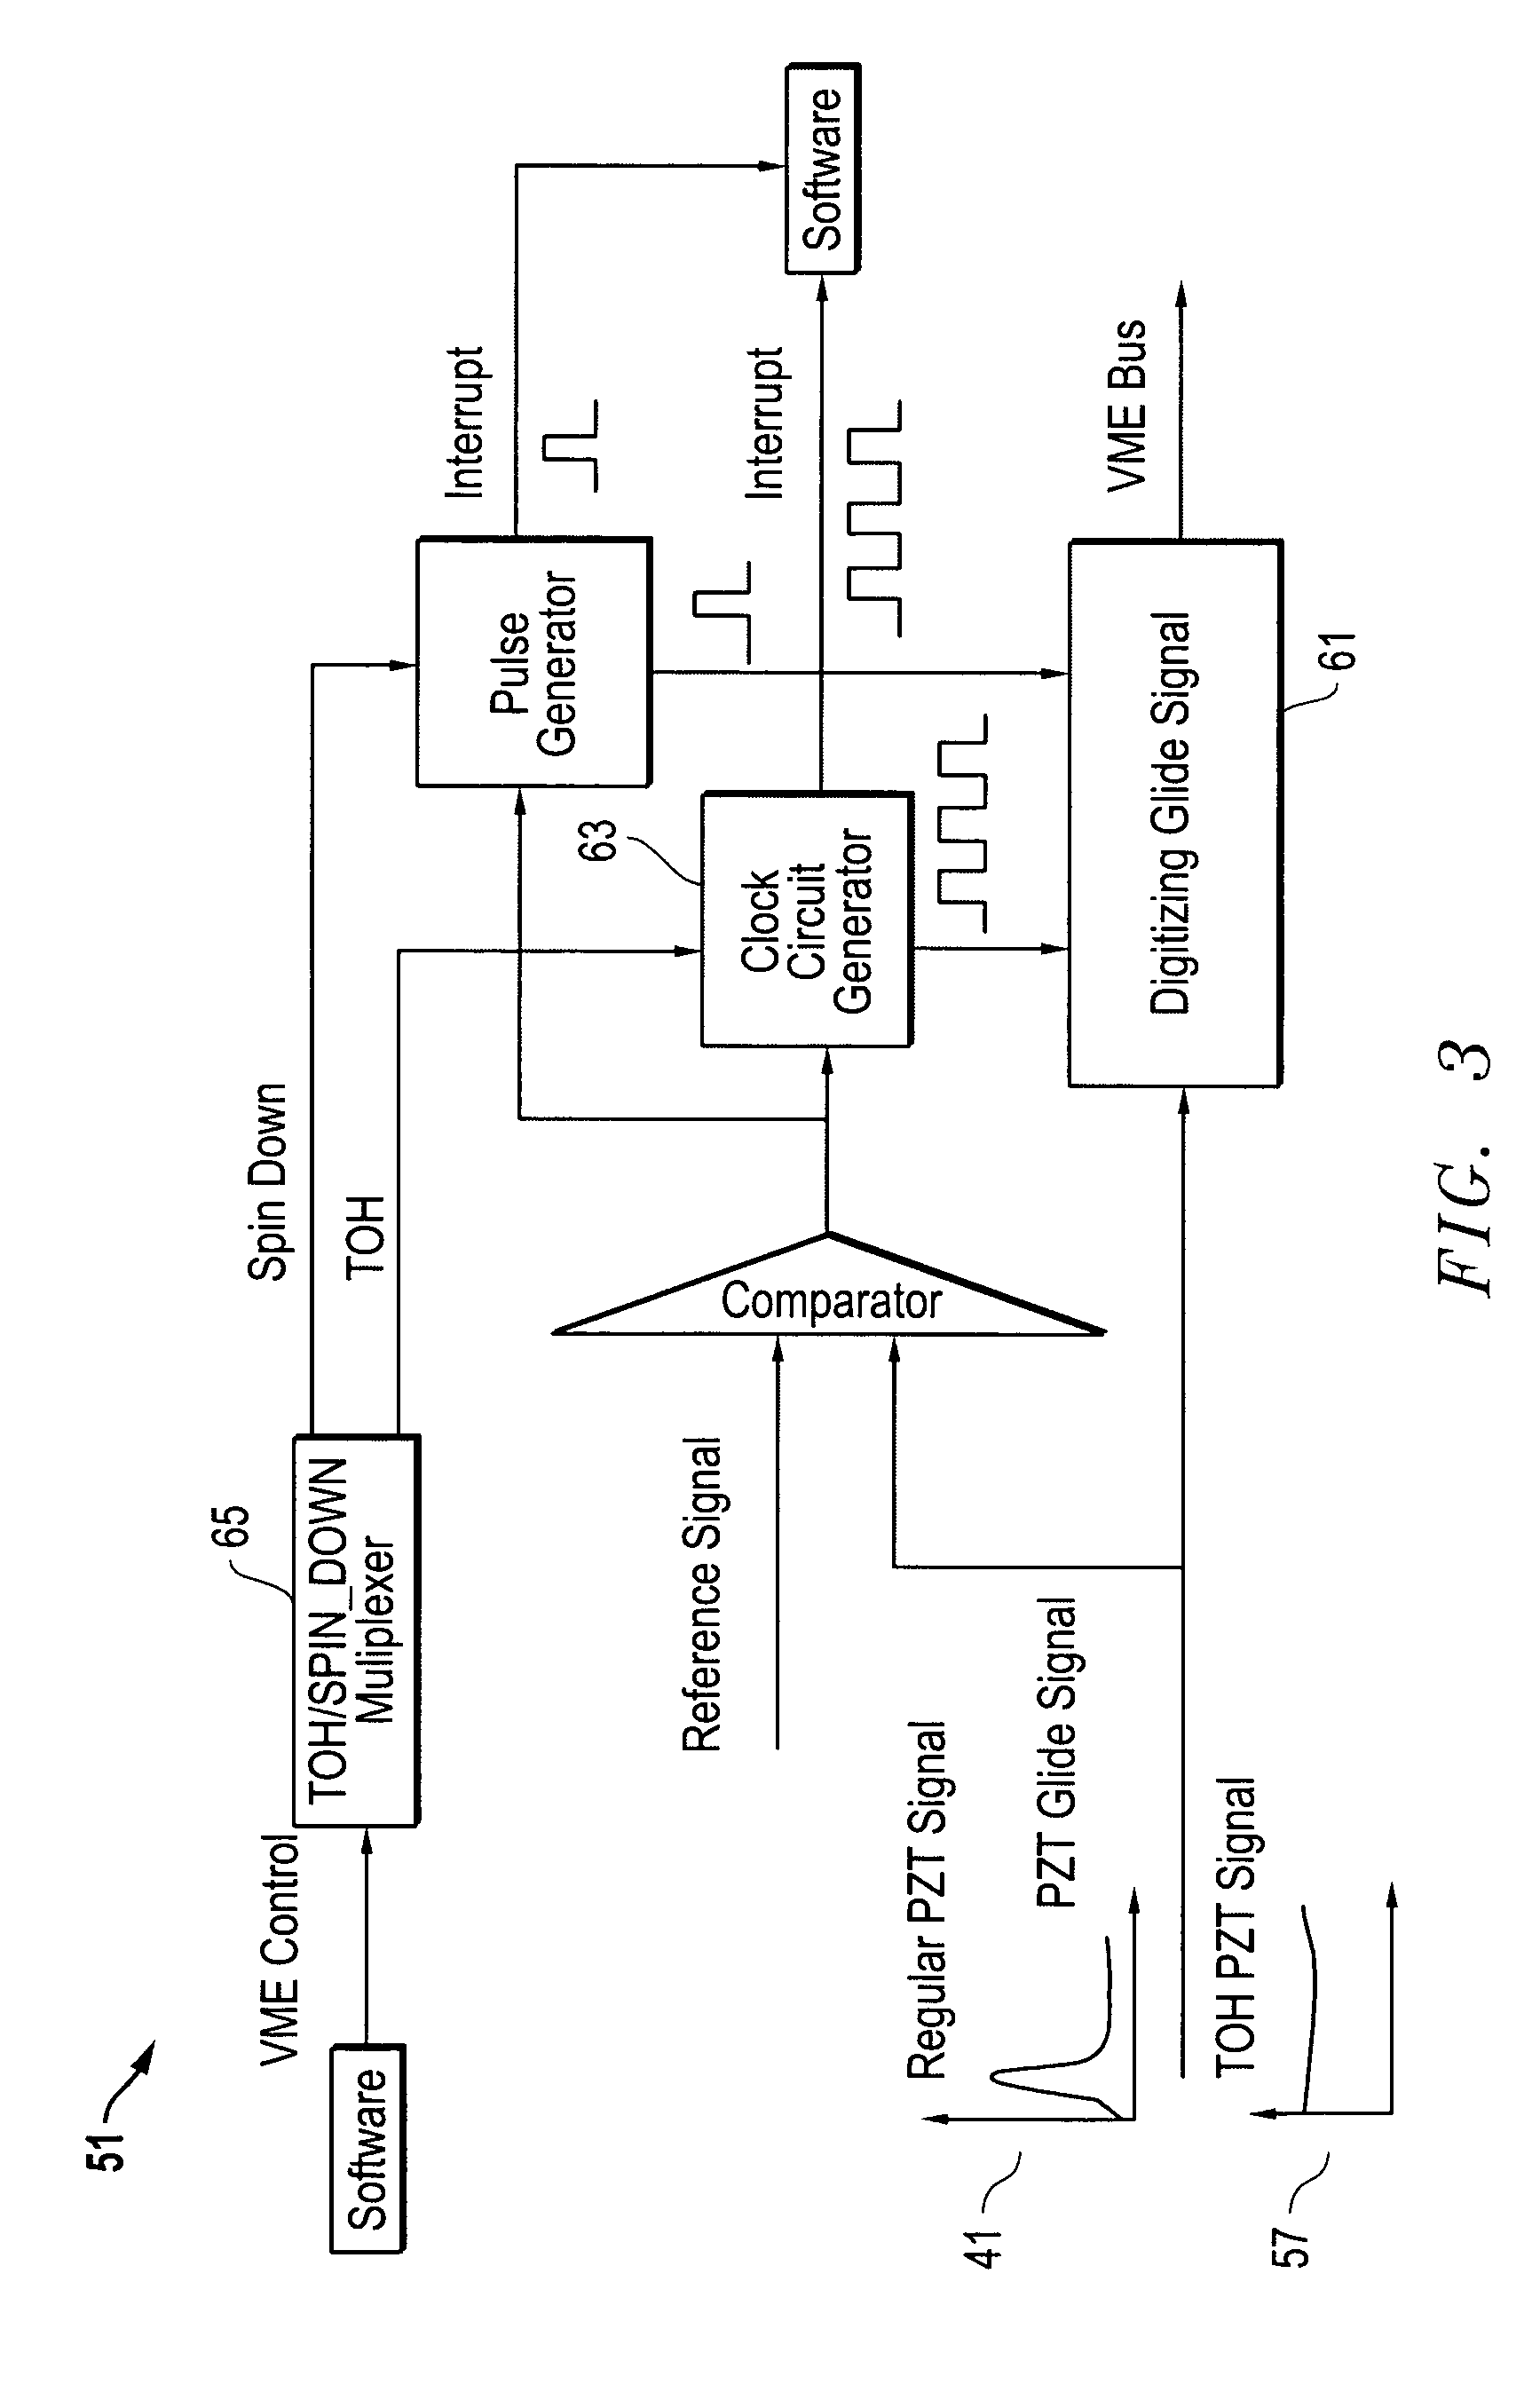 System, method, and apparatus for glide head calibration with enhanced PZT channel for very low qualification glide heights